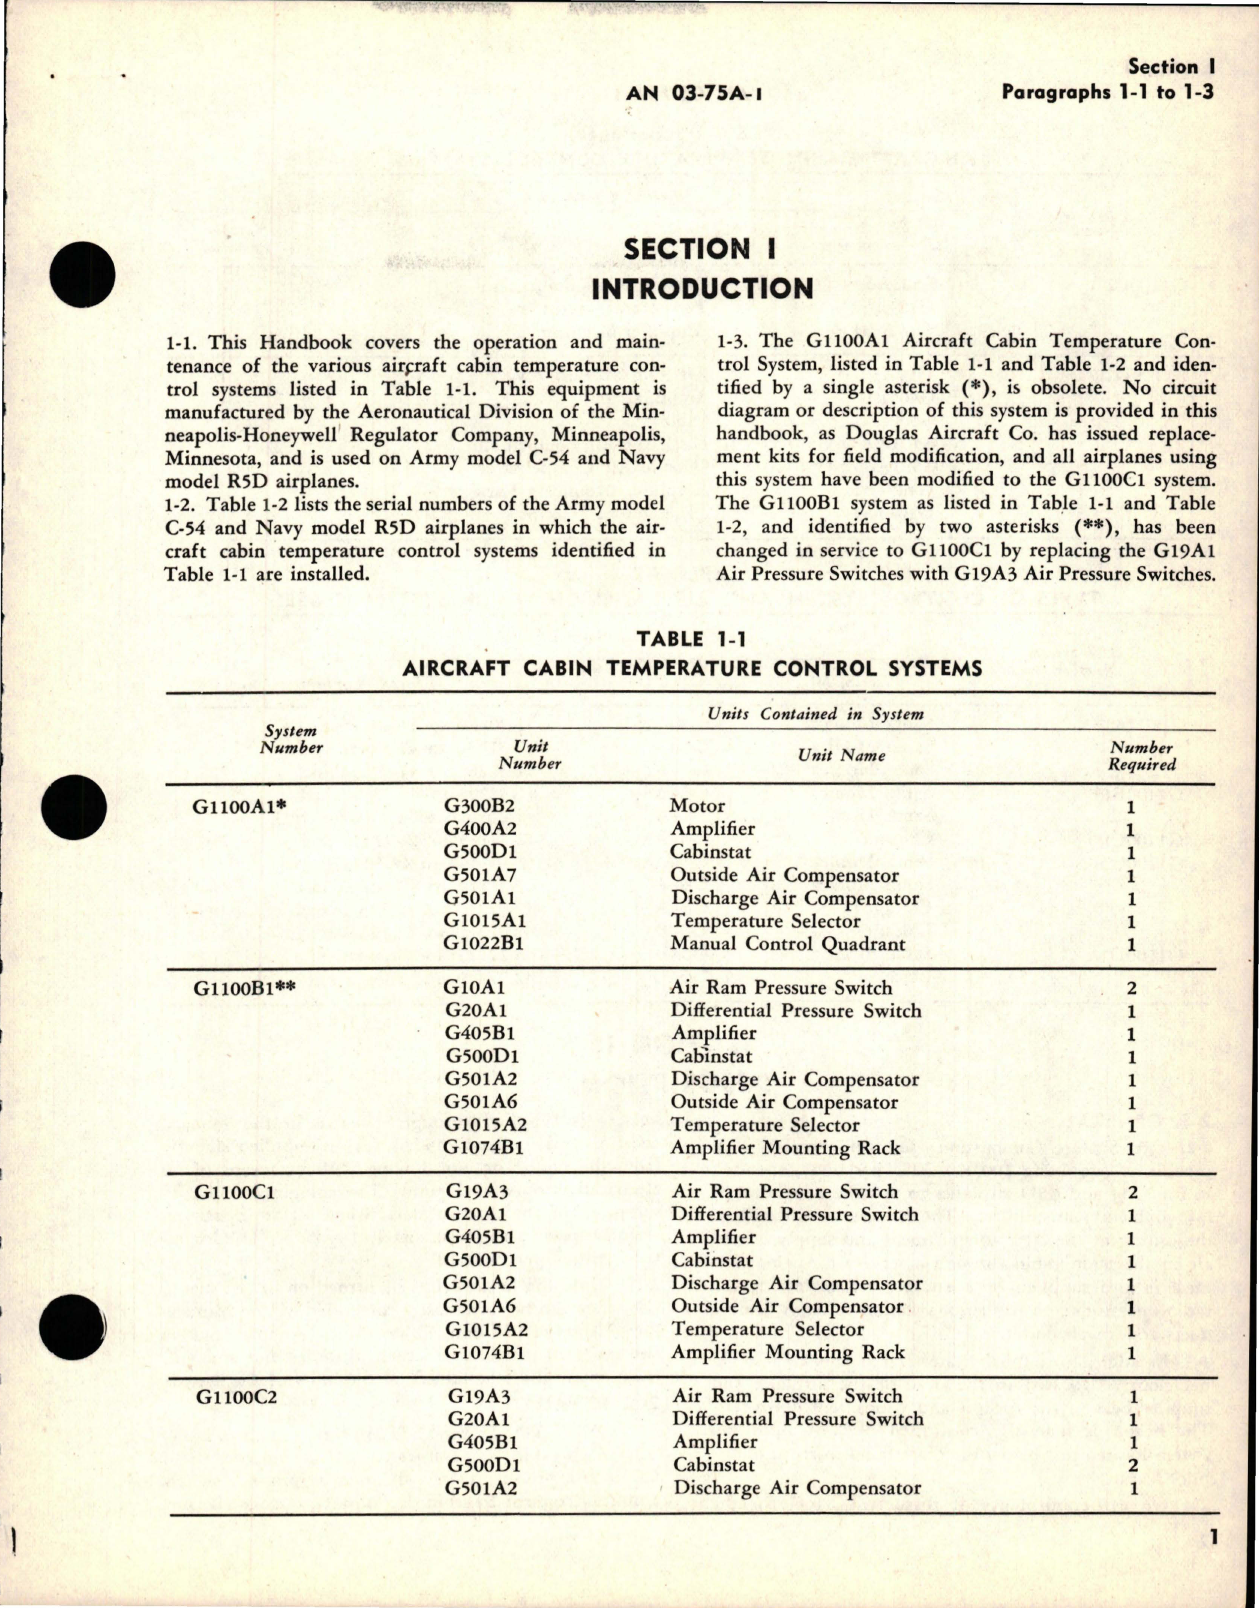 Sample page 5 from AirCorps Library document: Operation and Service Instructions for Cabin Temperature Control Systems - G1100 Series